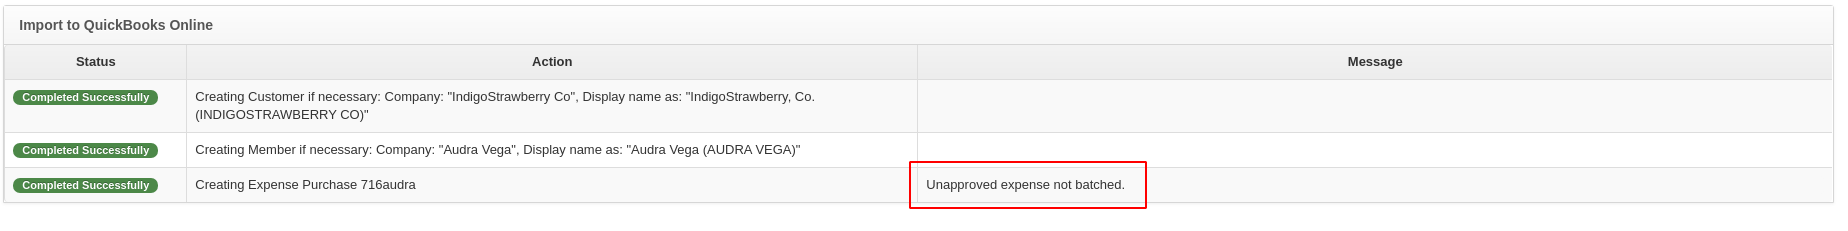 approved-expenses